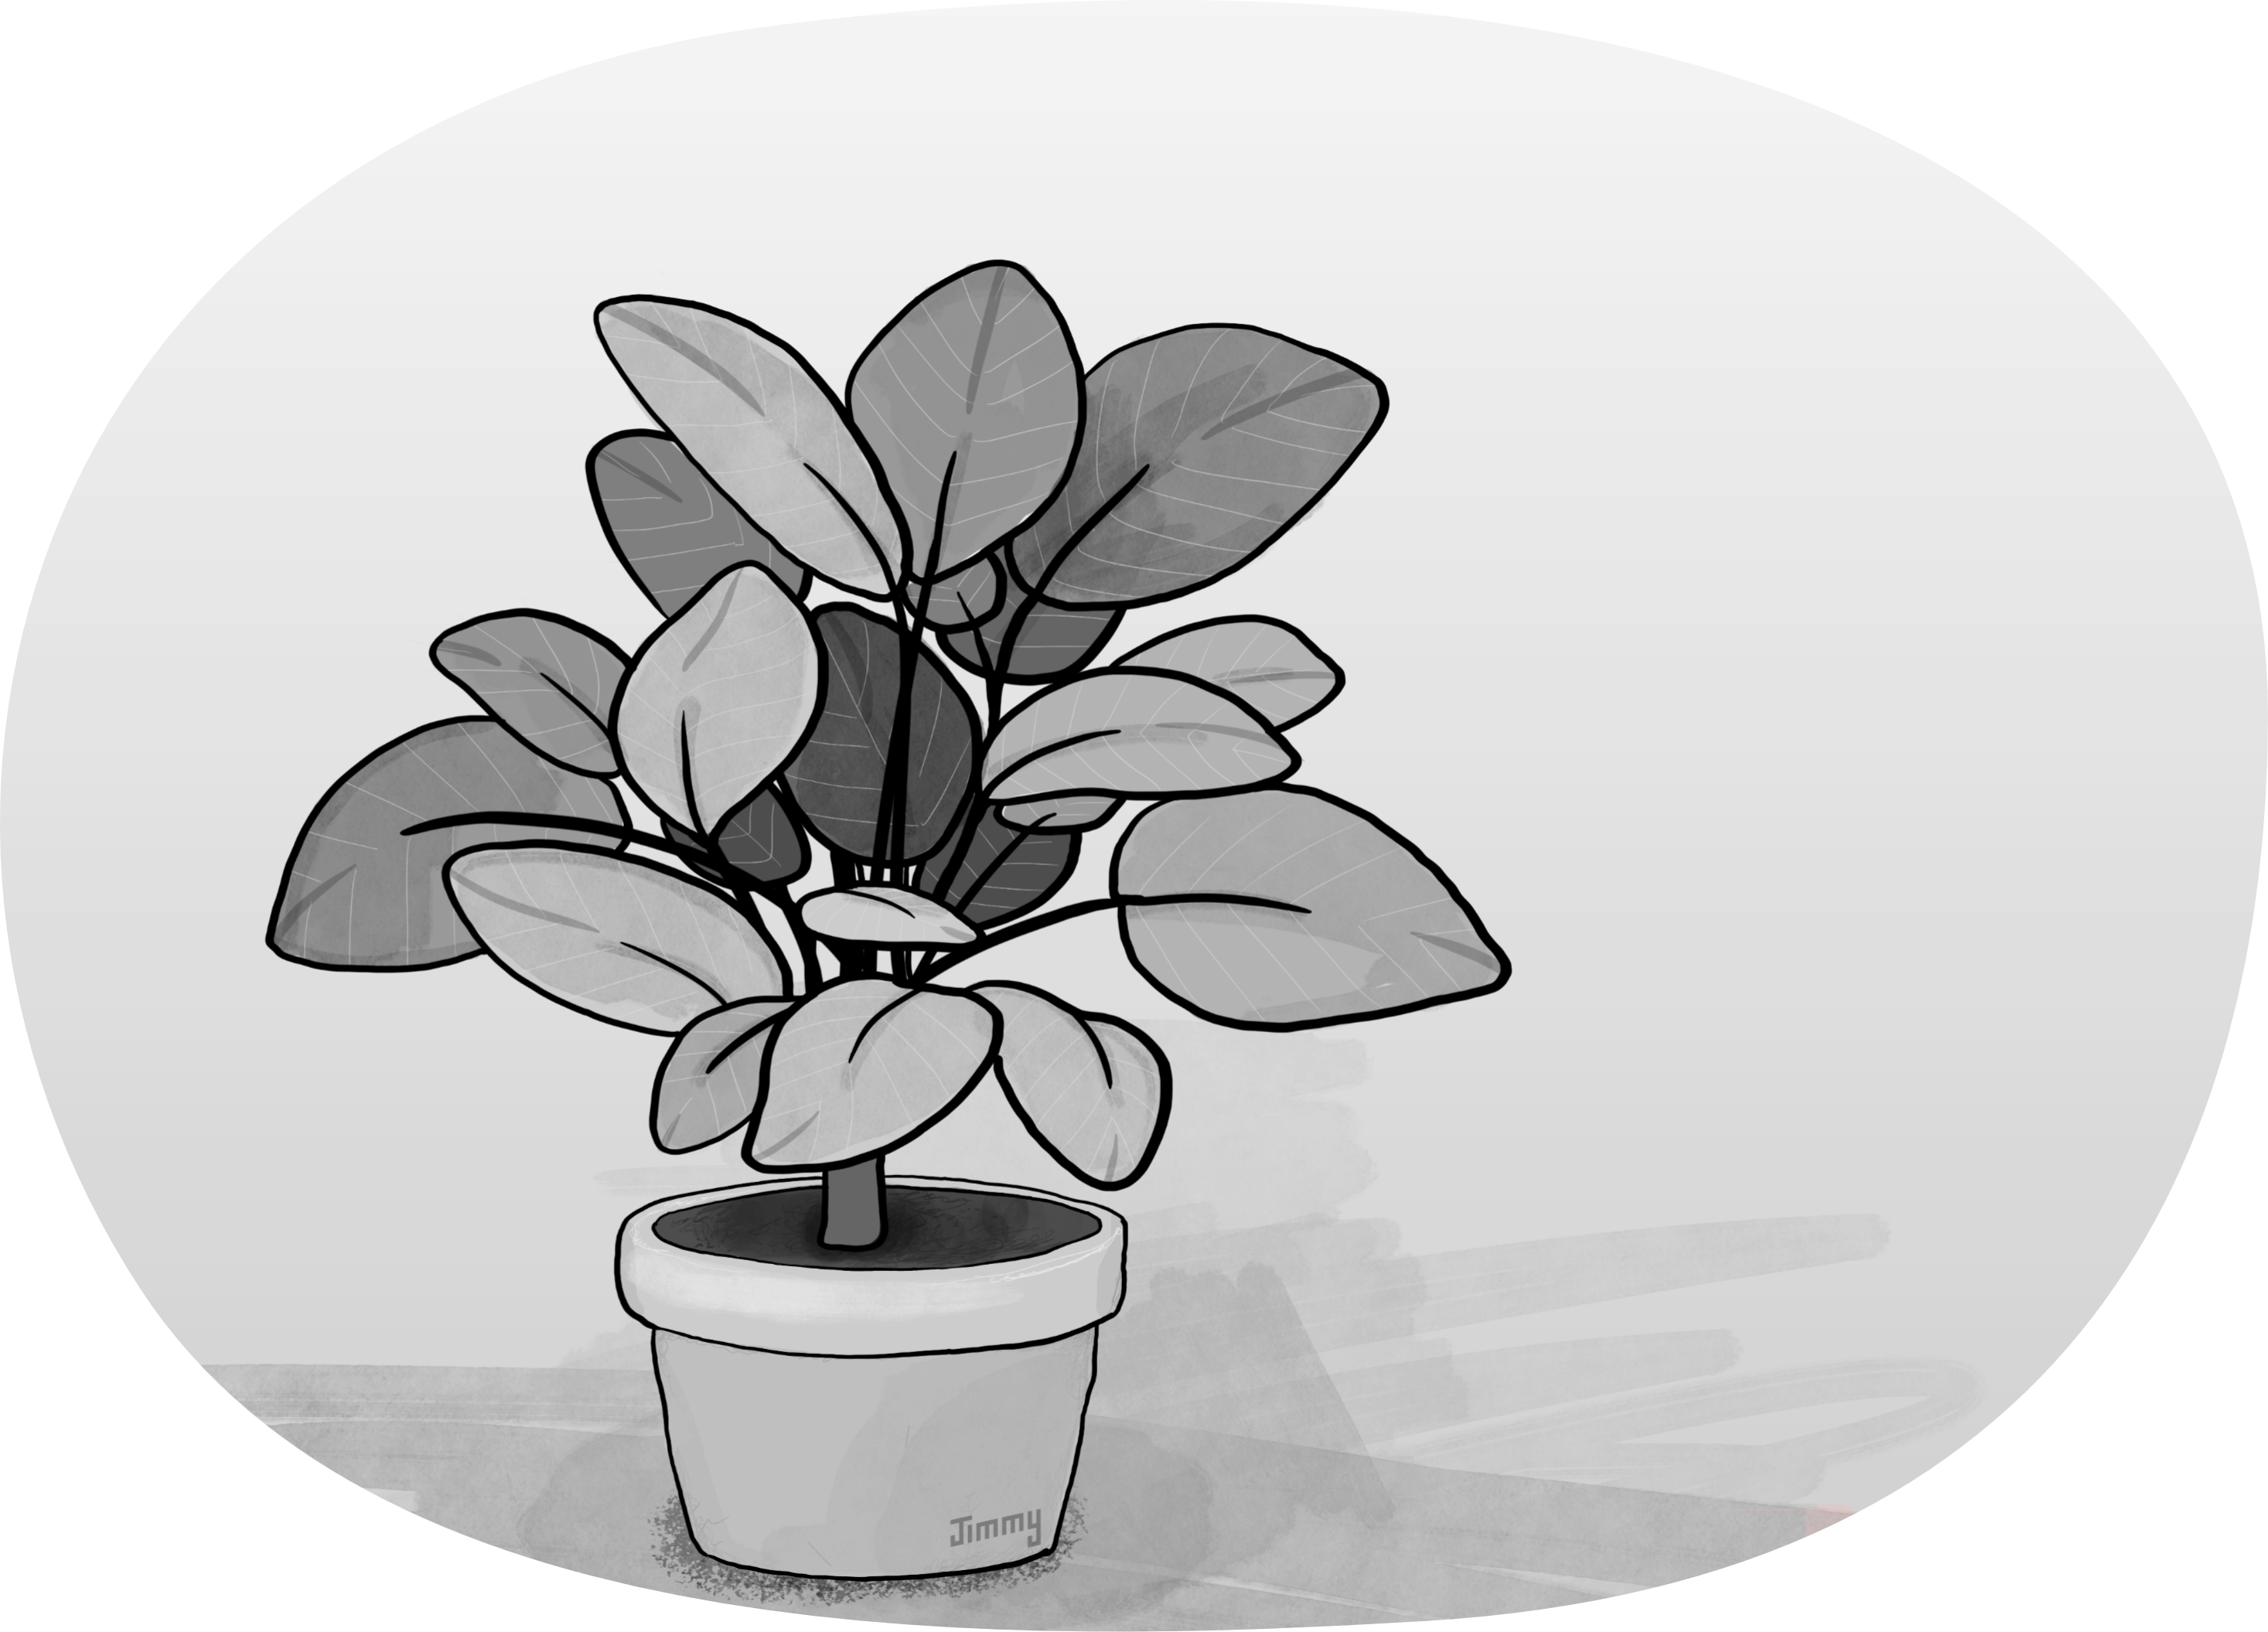 Illustration of a potted plant